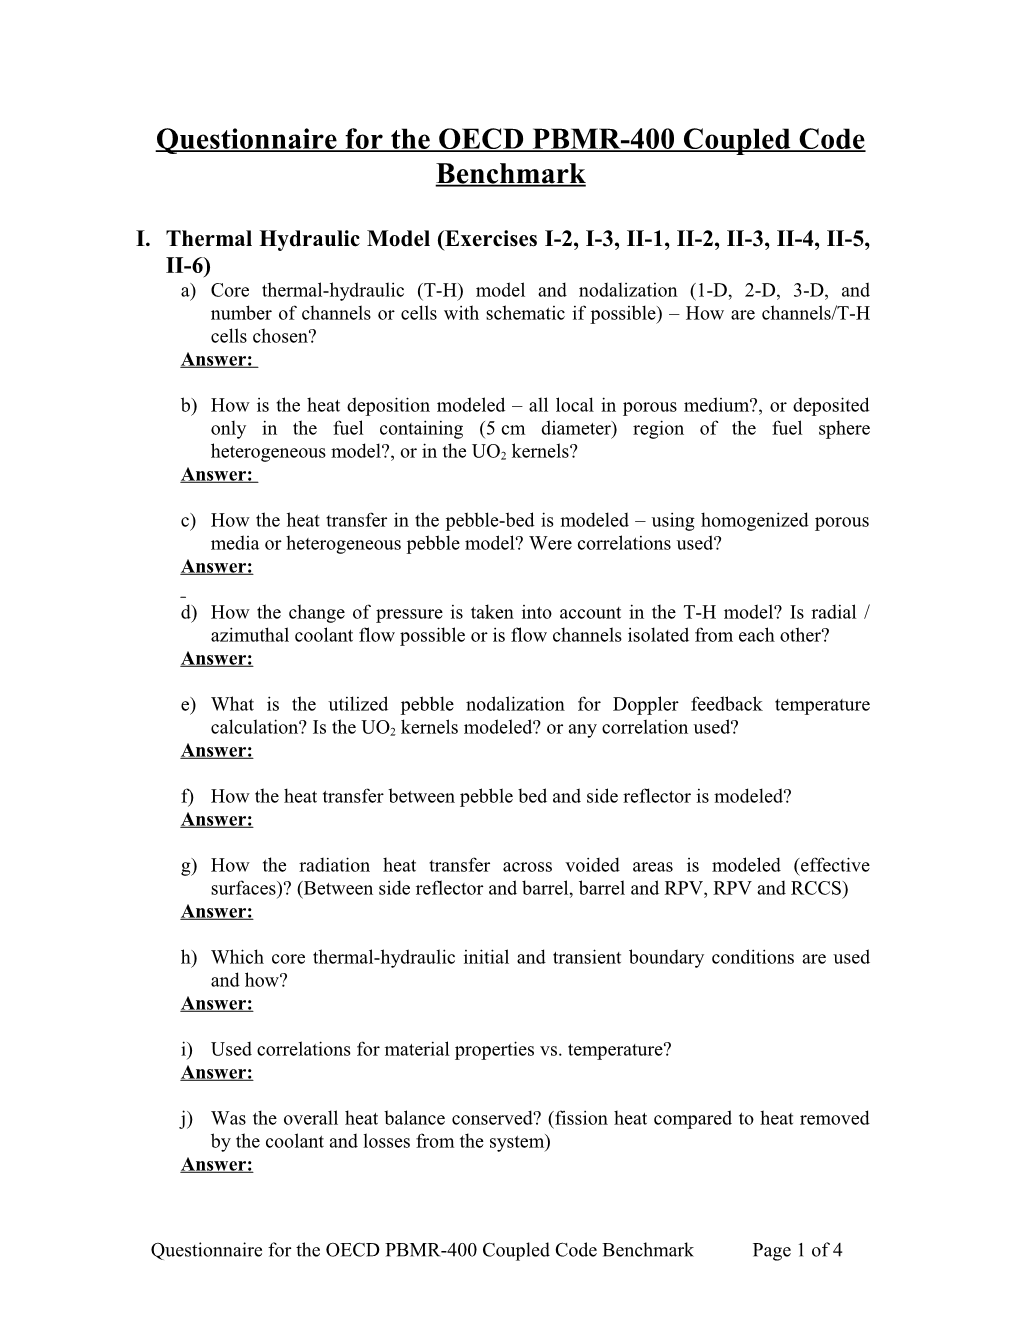 Questionnaire for the Exercise 2